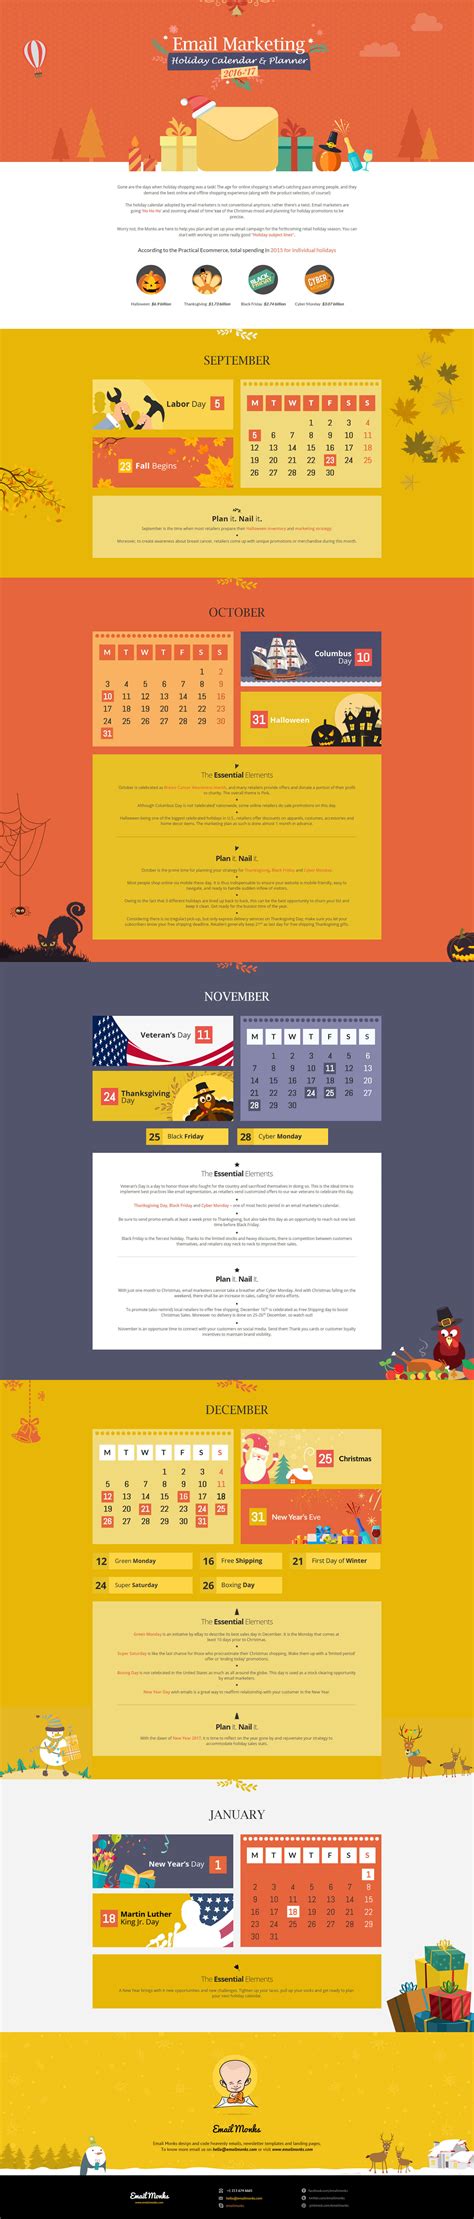 Email Marketing Holiday Calendar And Planner Infographic